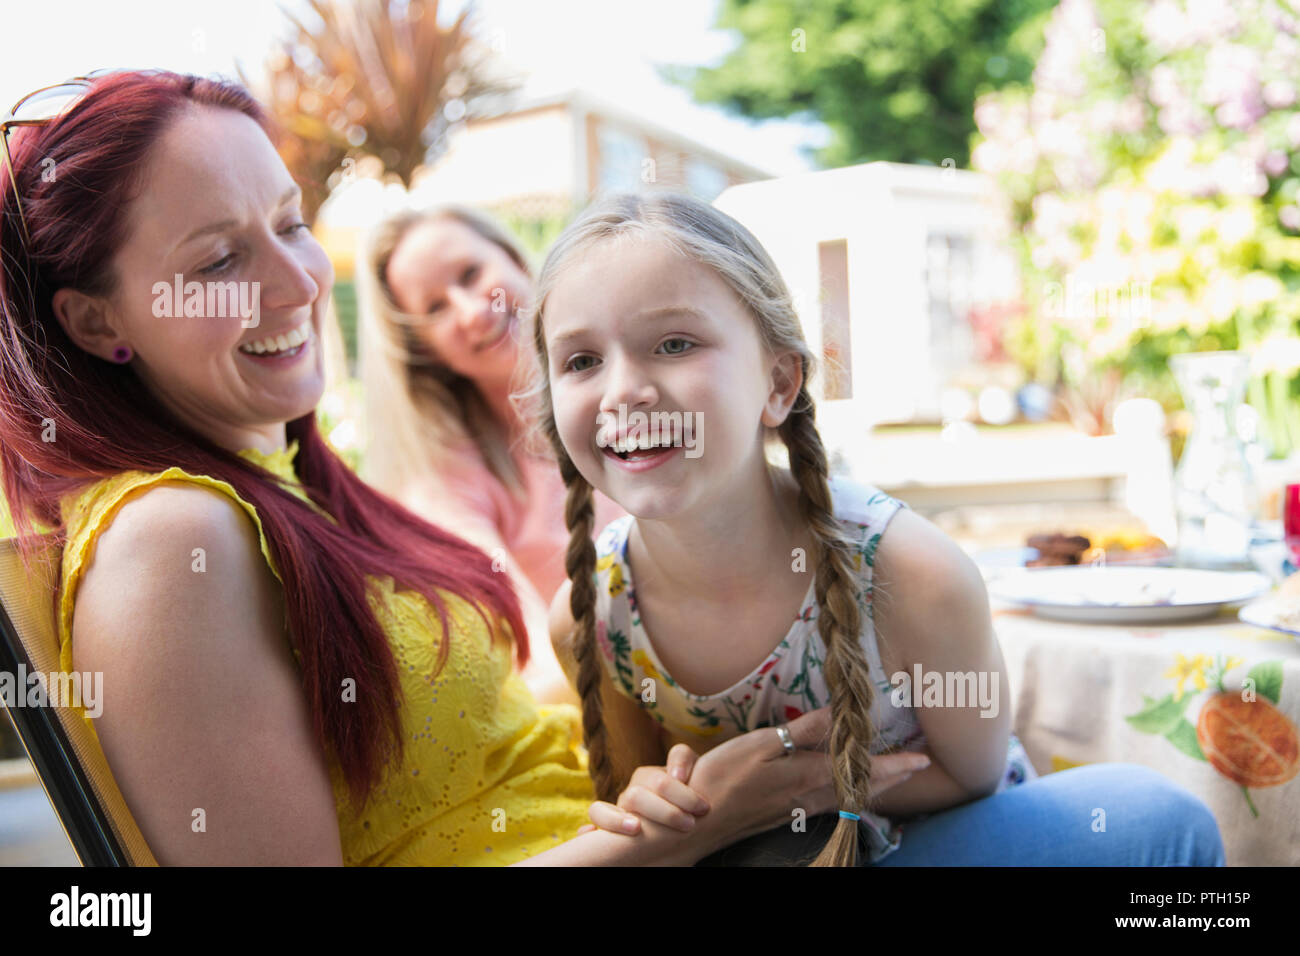 Affectionate mother and daughter on patio Stock Photo